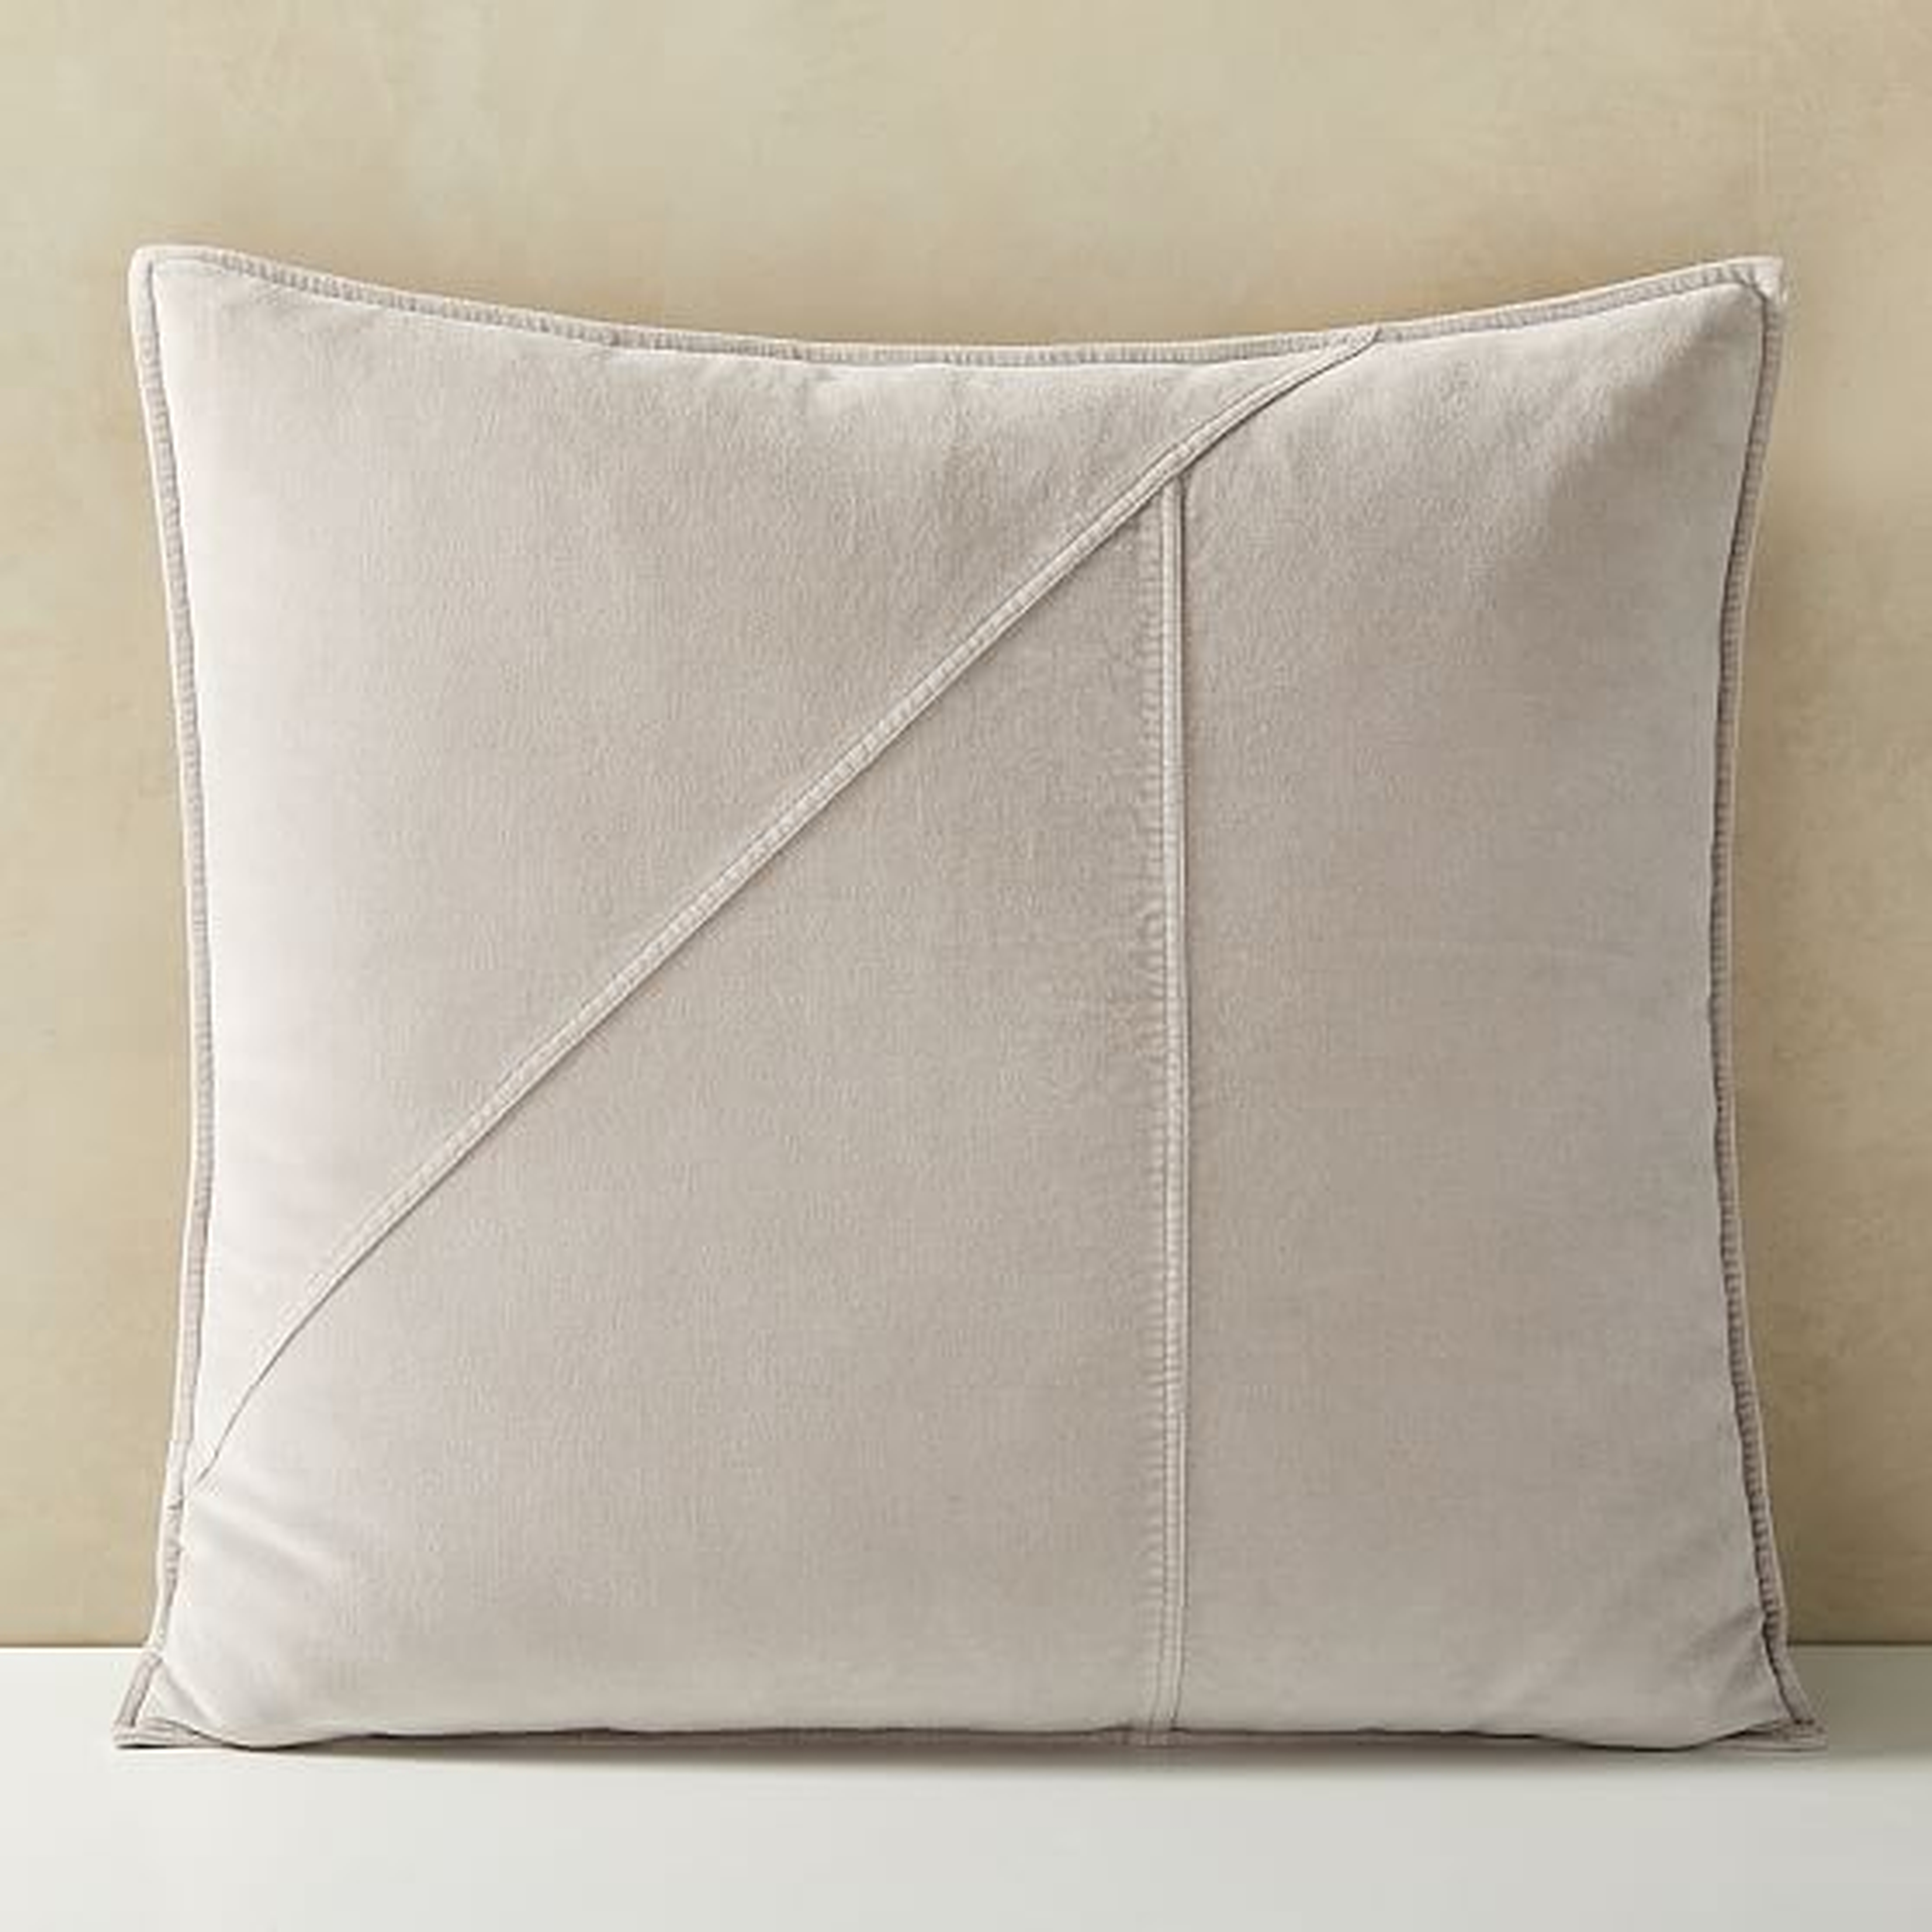 Washed Cotton Velvet Pillow Cover, 24"x24", Pearl Gray - West Elm